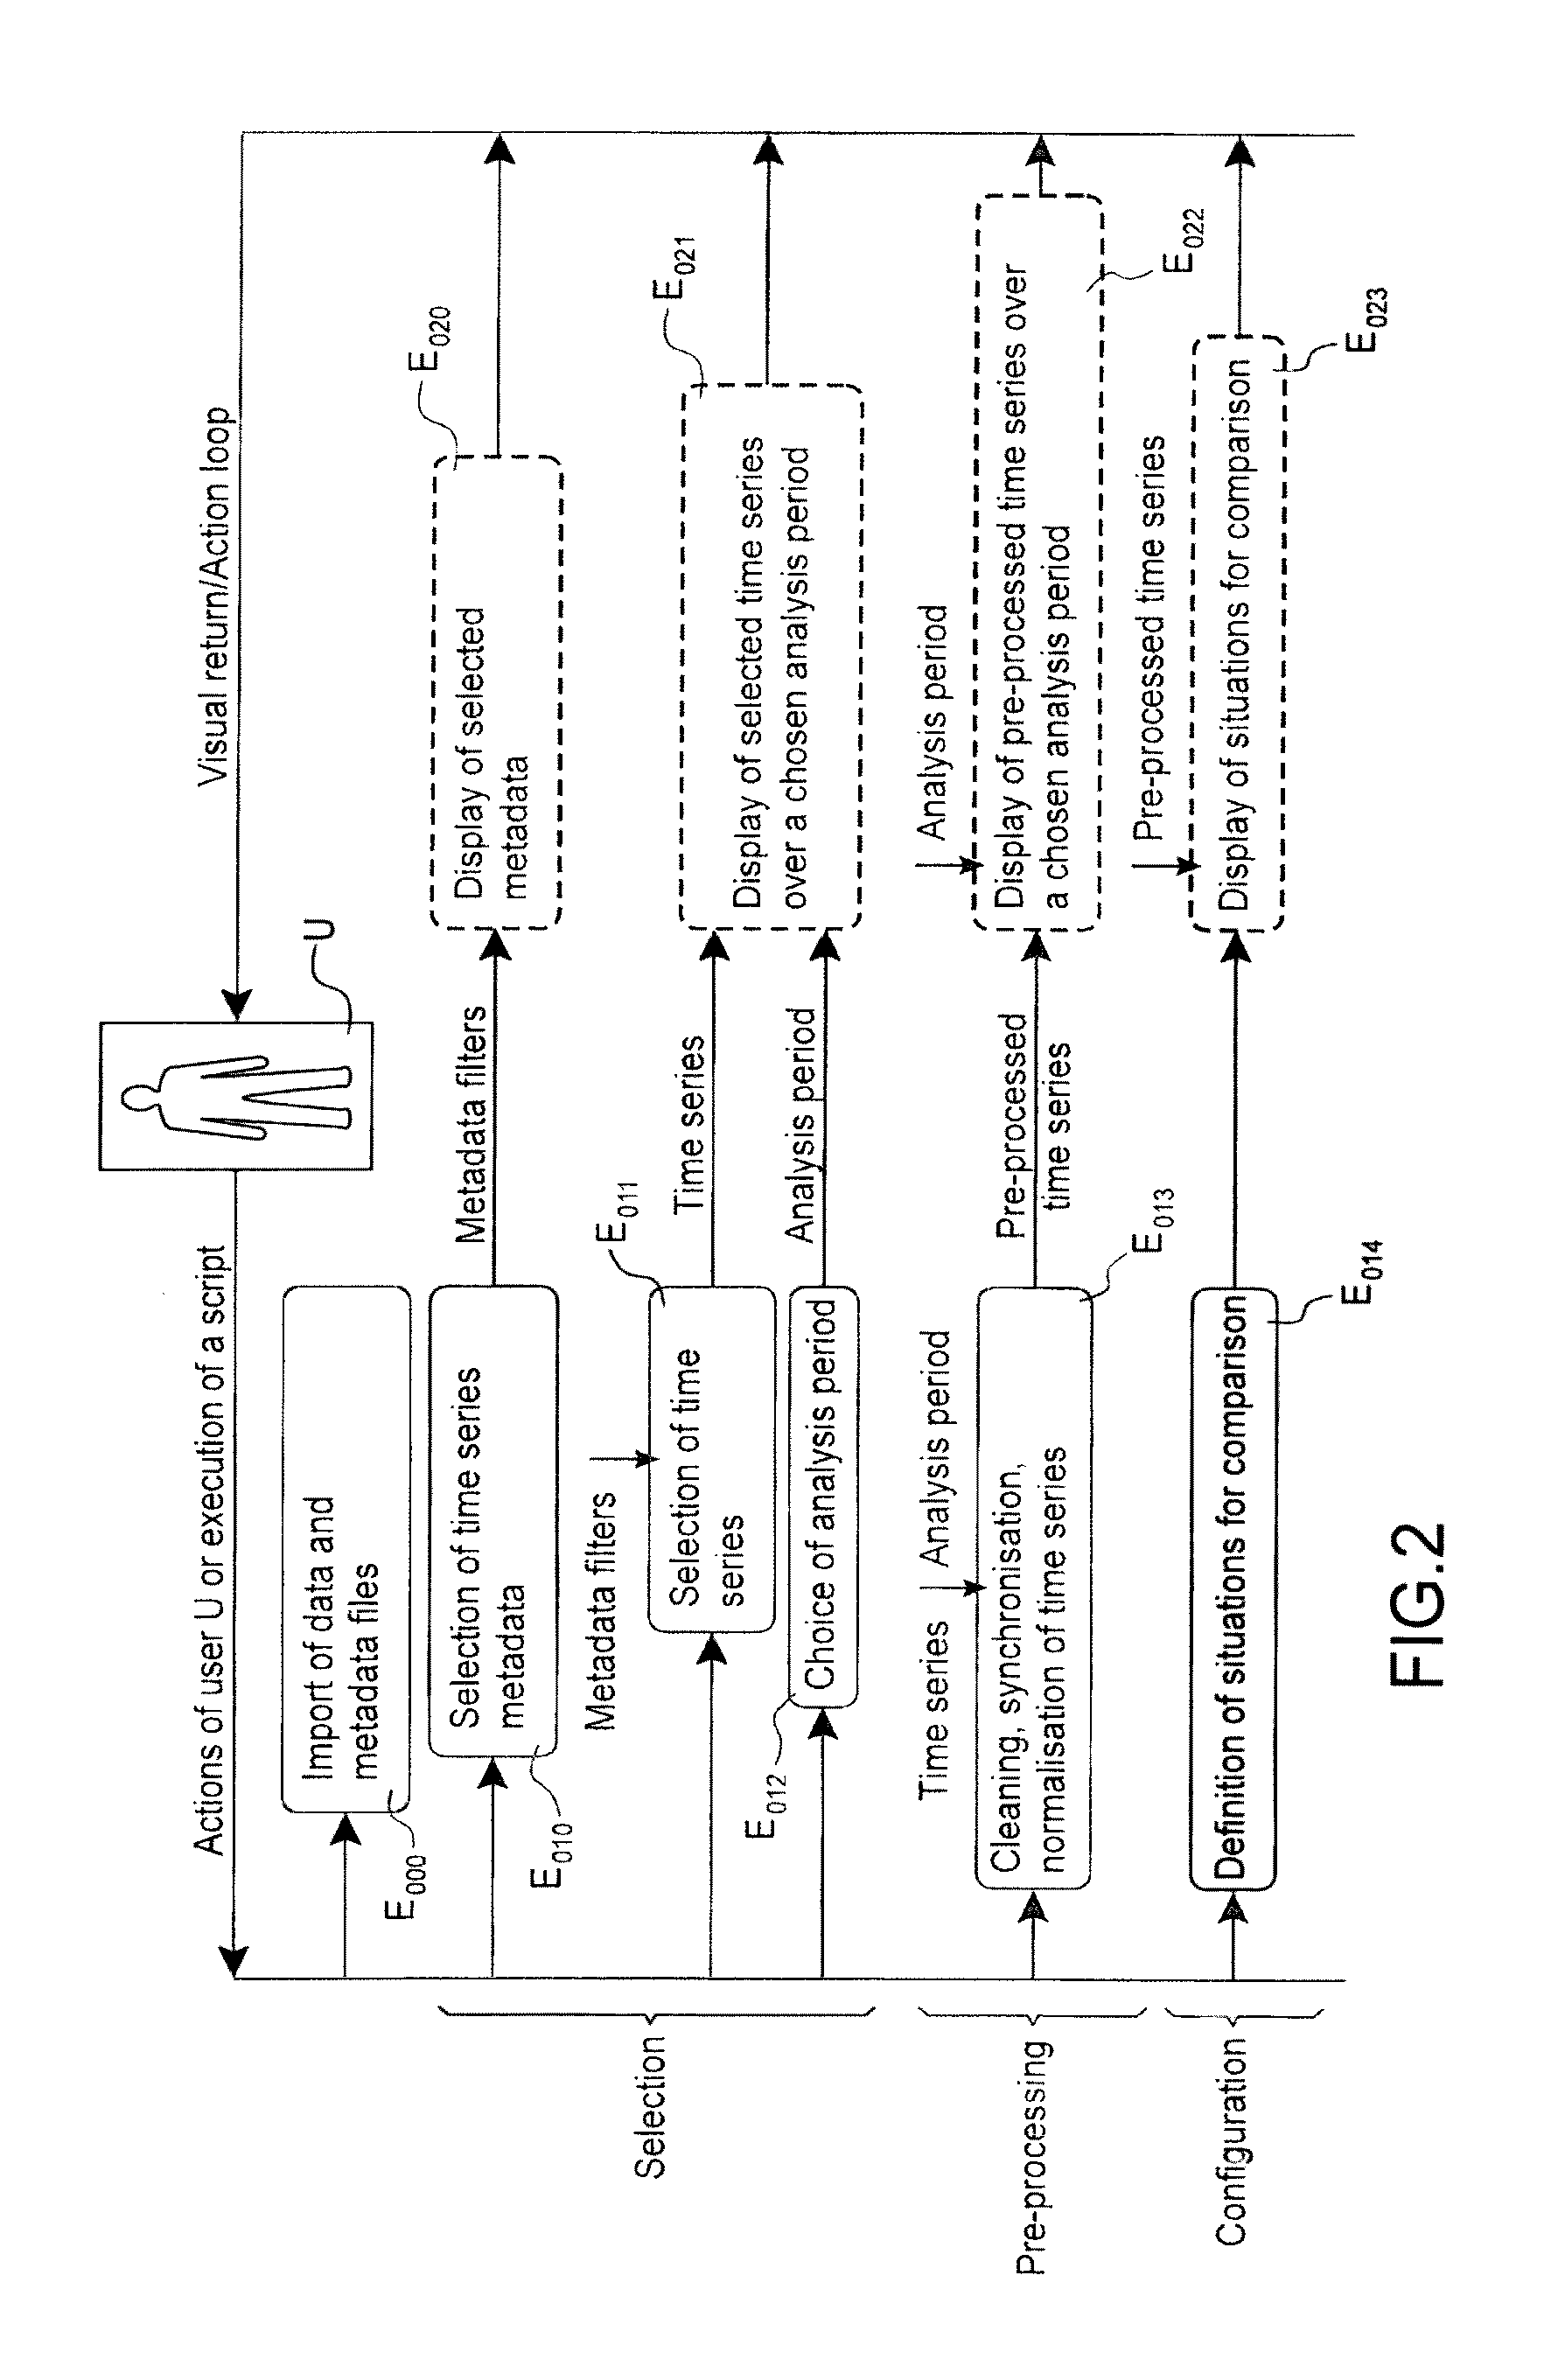 System for processing data and modelling for analysis of the energy consumption of a site